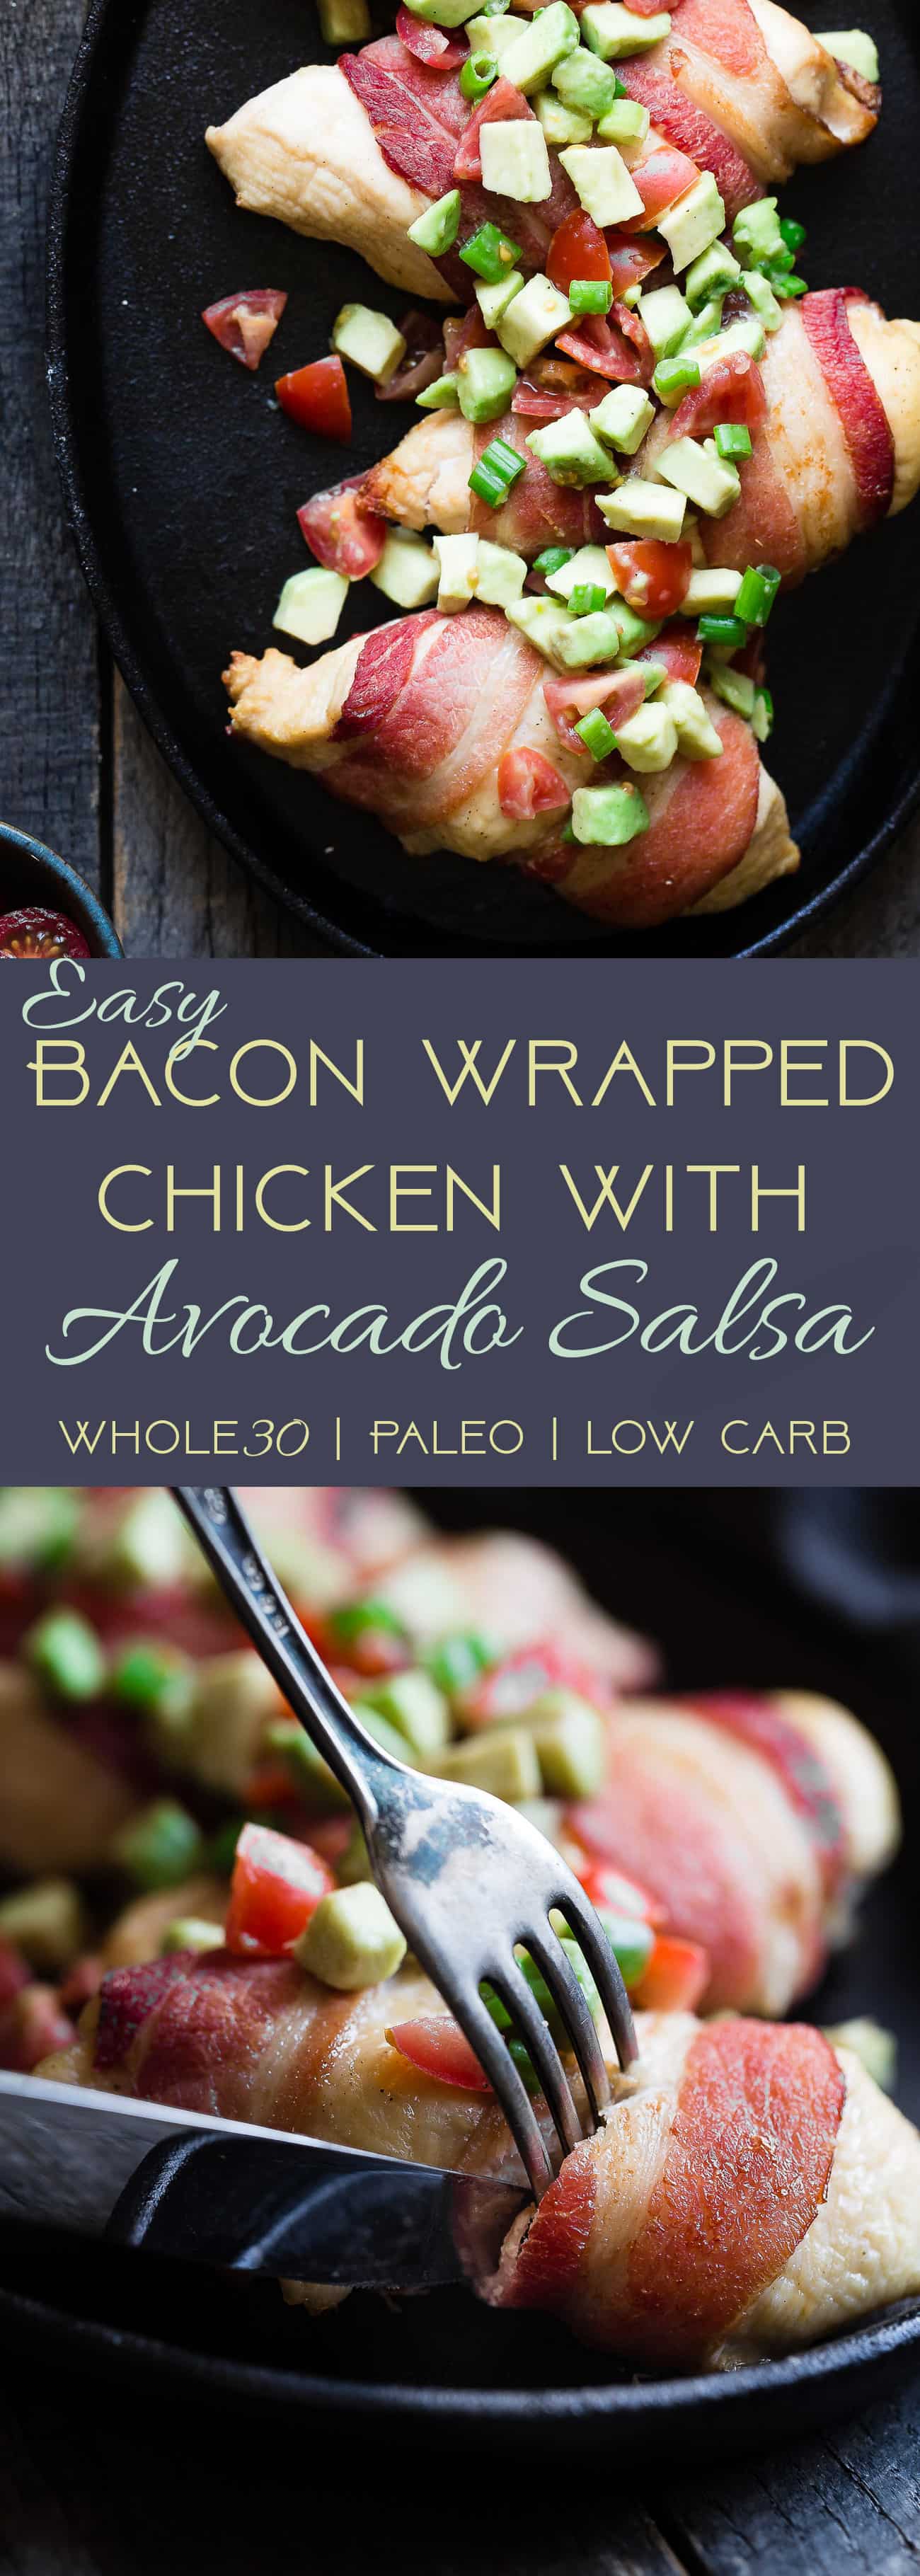 Whole30 Oven Baked Bacon Wrapped Chicken Breast - with a CREAMY, addicting avocado salsa, this is one quick and easy, kid friendly dinner that's paleo, keto and whole30 compliant! | Foodfaithfitness.com | @FoodFaithFit | keto bacon wrapped chicken. paleo bacon wrapped chicken. easy bacon wrapped chicken. low carb bacon wrapped chicken. whole30 chicken recipes. paleo chicken recipes.